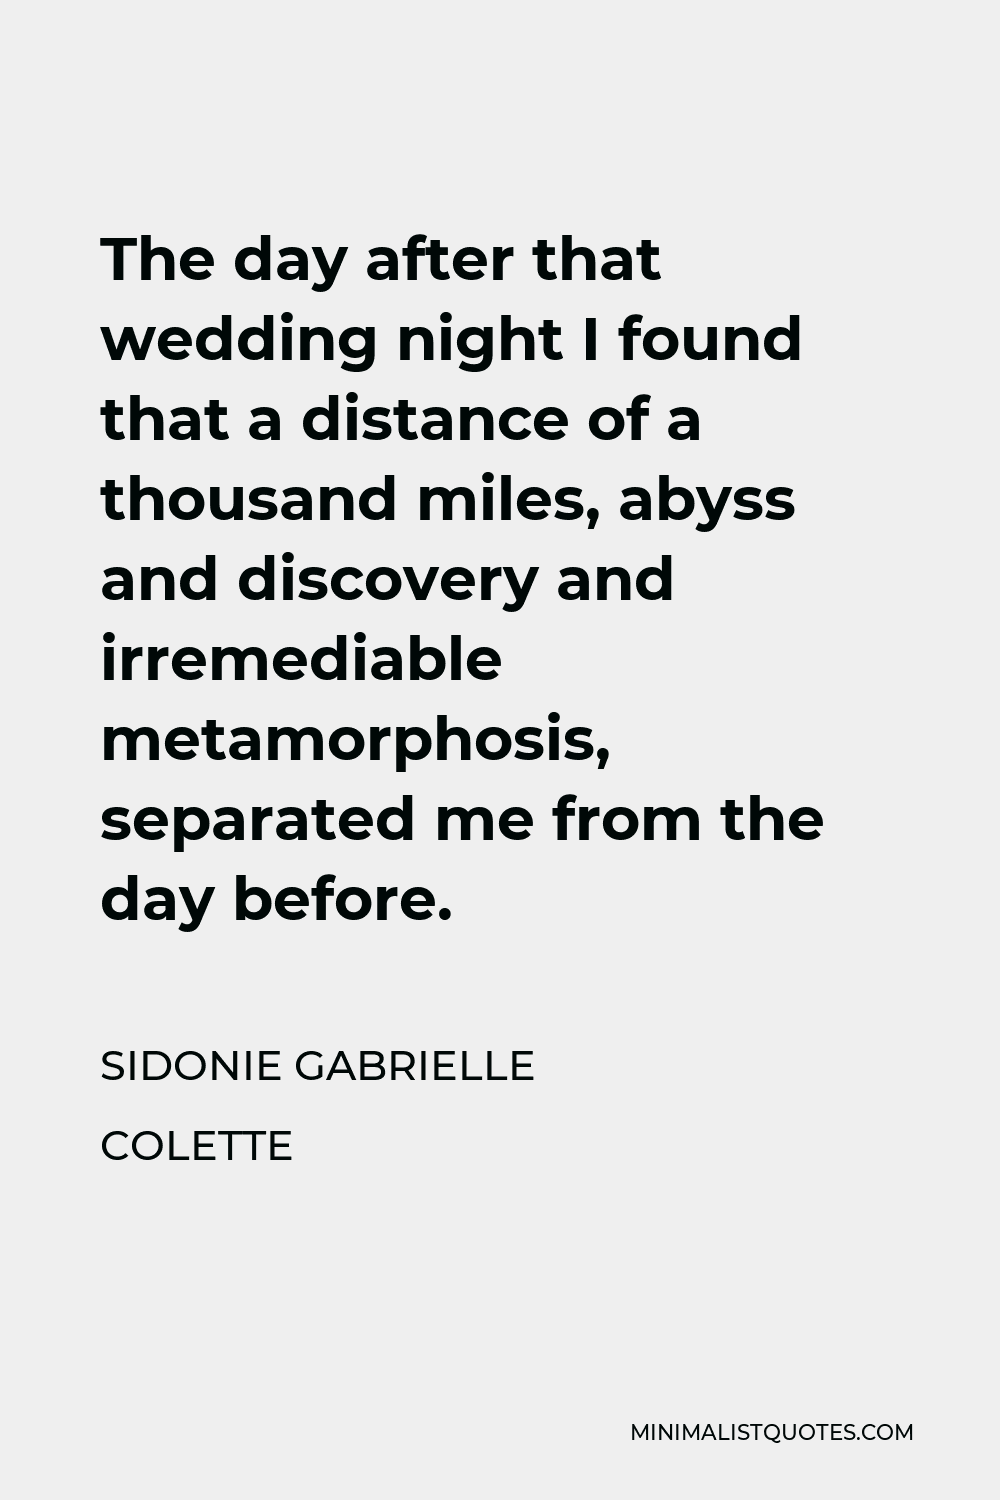 Sidonie Gabrielle Colette Quote - The day after that wedding night I found that a distance of a thousand miles, abyss and discovery and irremediable metamorphosis, separated me from the day before.